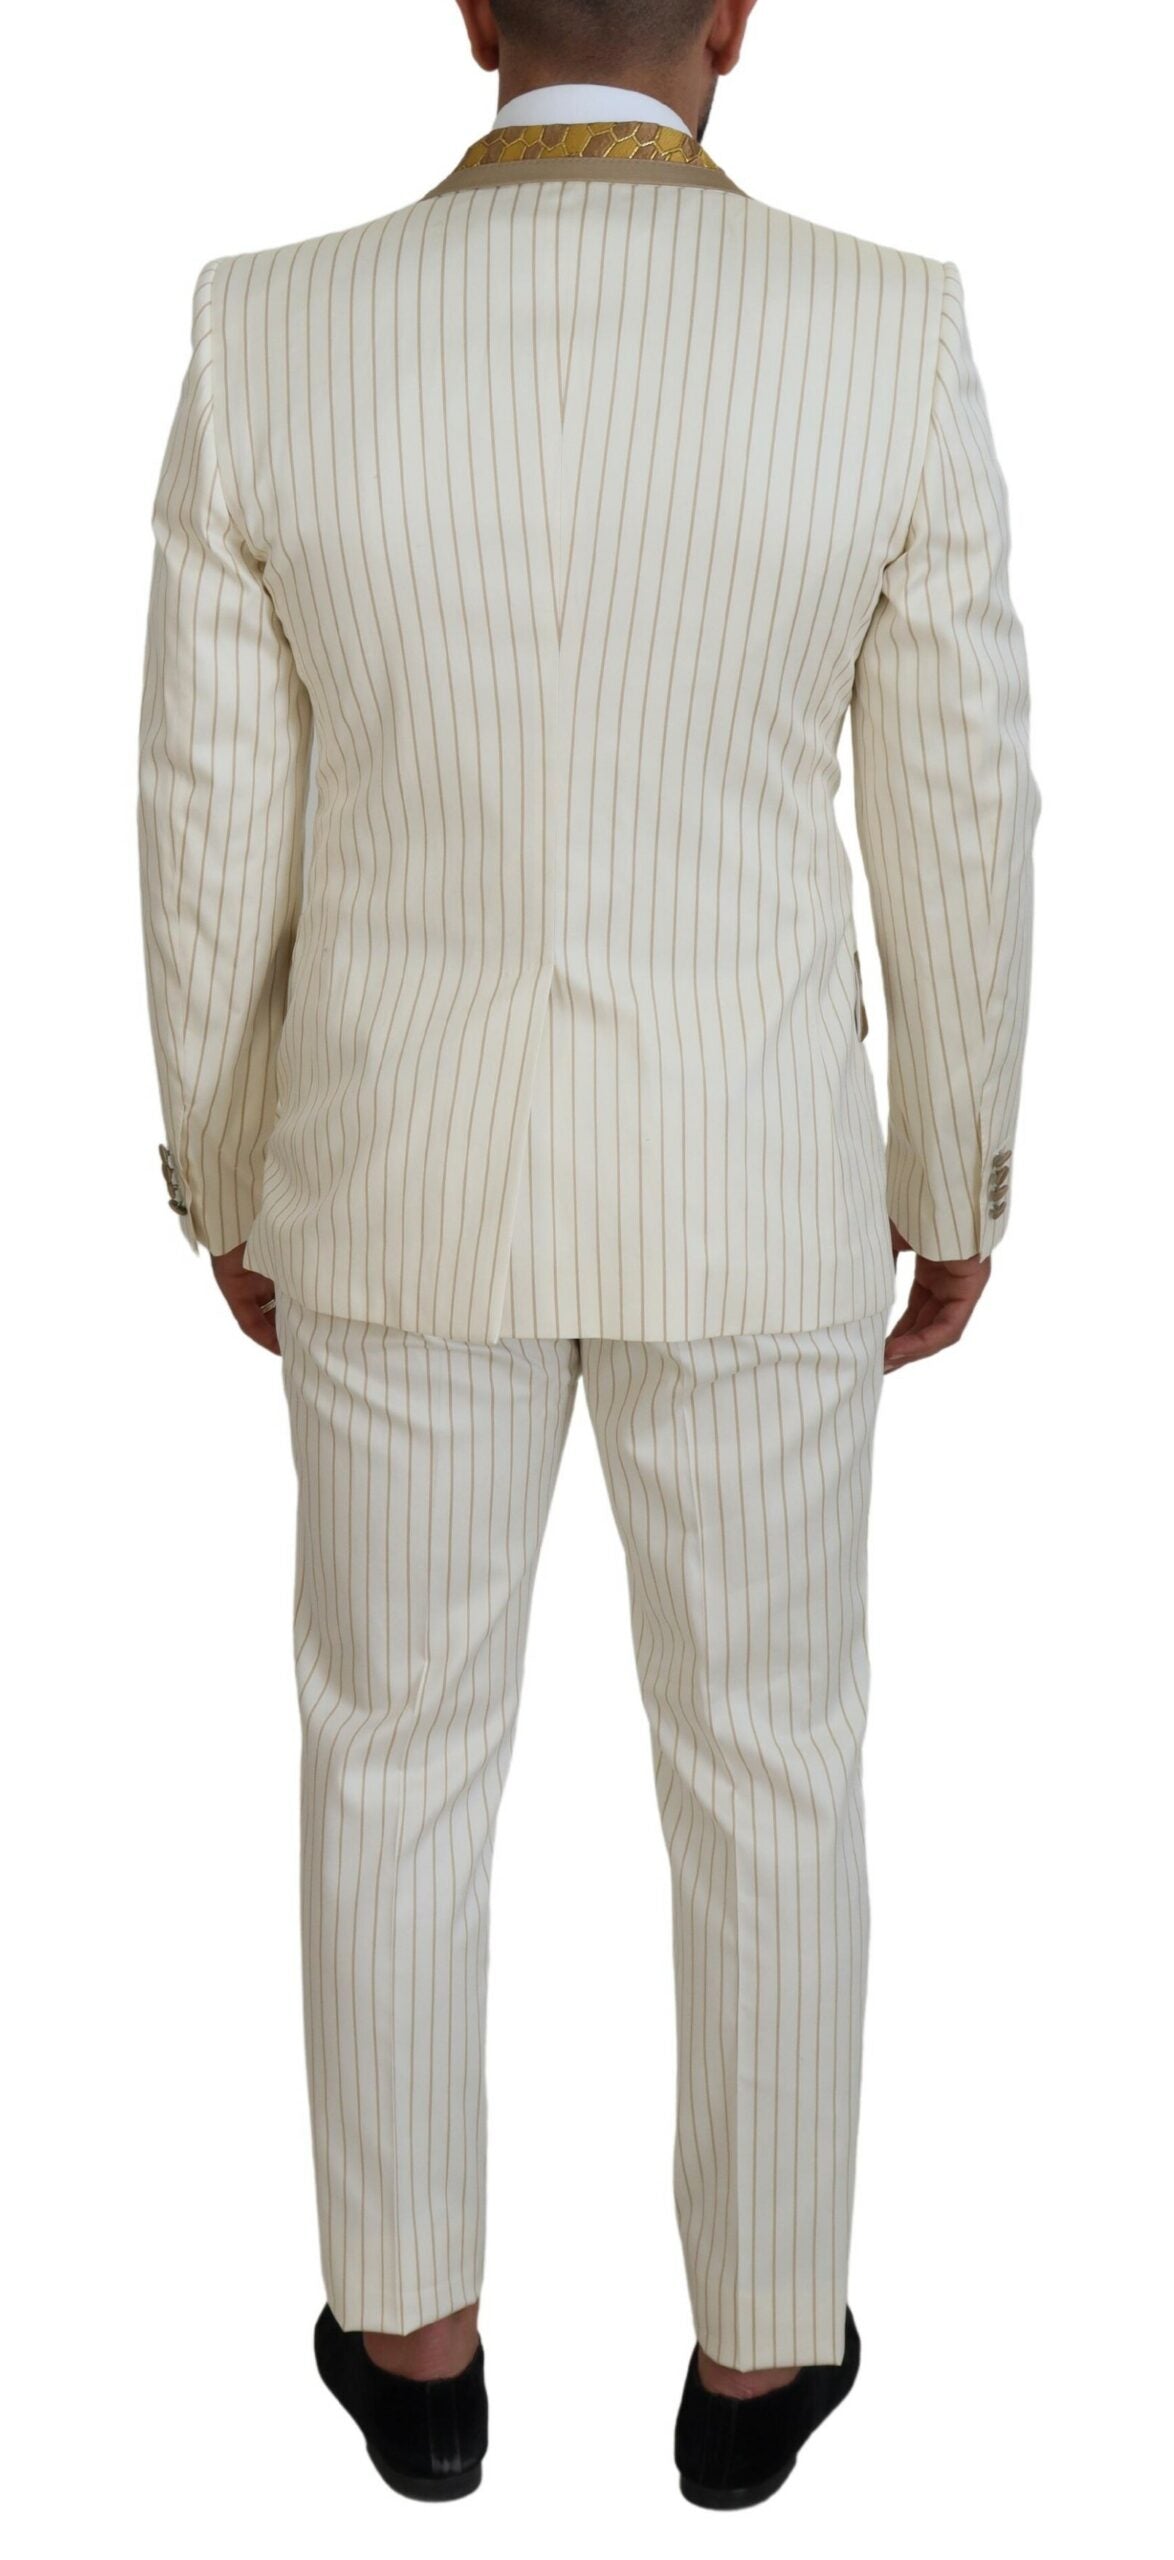 Dolce & Gabbana Men's Off White Gold Striped Tuxedo Slim Fit Suit - Designed by Dolce & Gabbana Available to Buy at a Discounted Price on Moon Behind The Hill Online Designer Discount Store